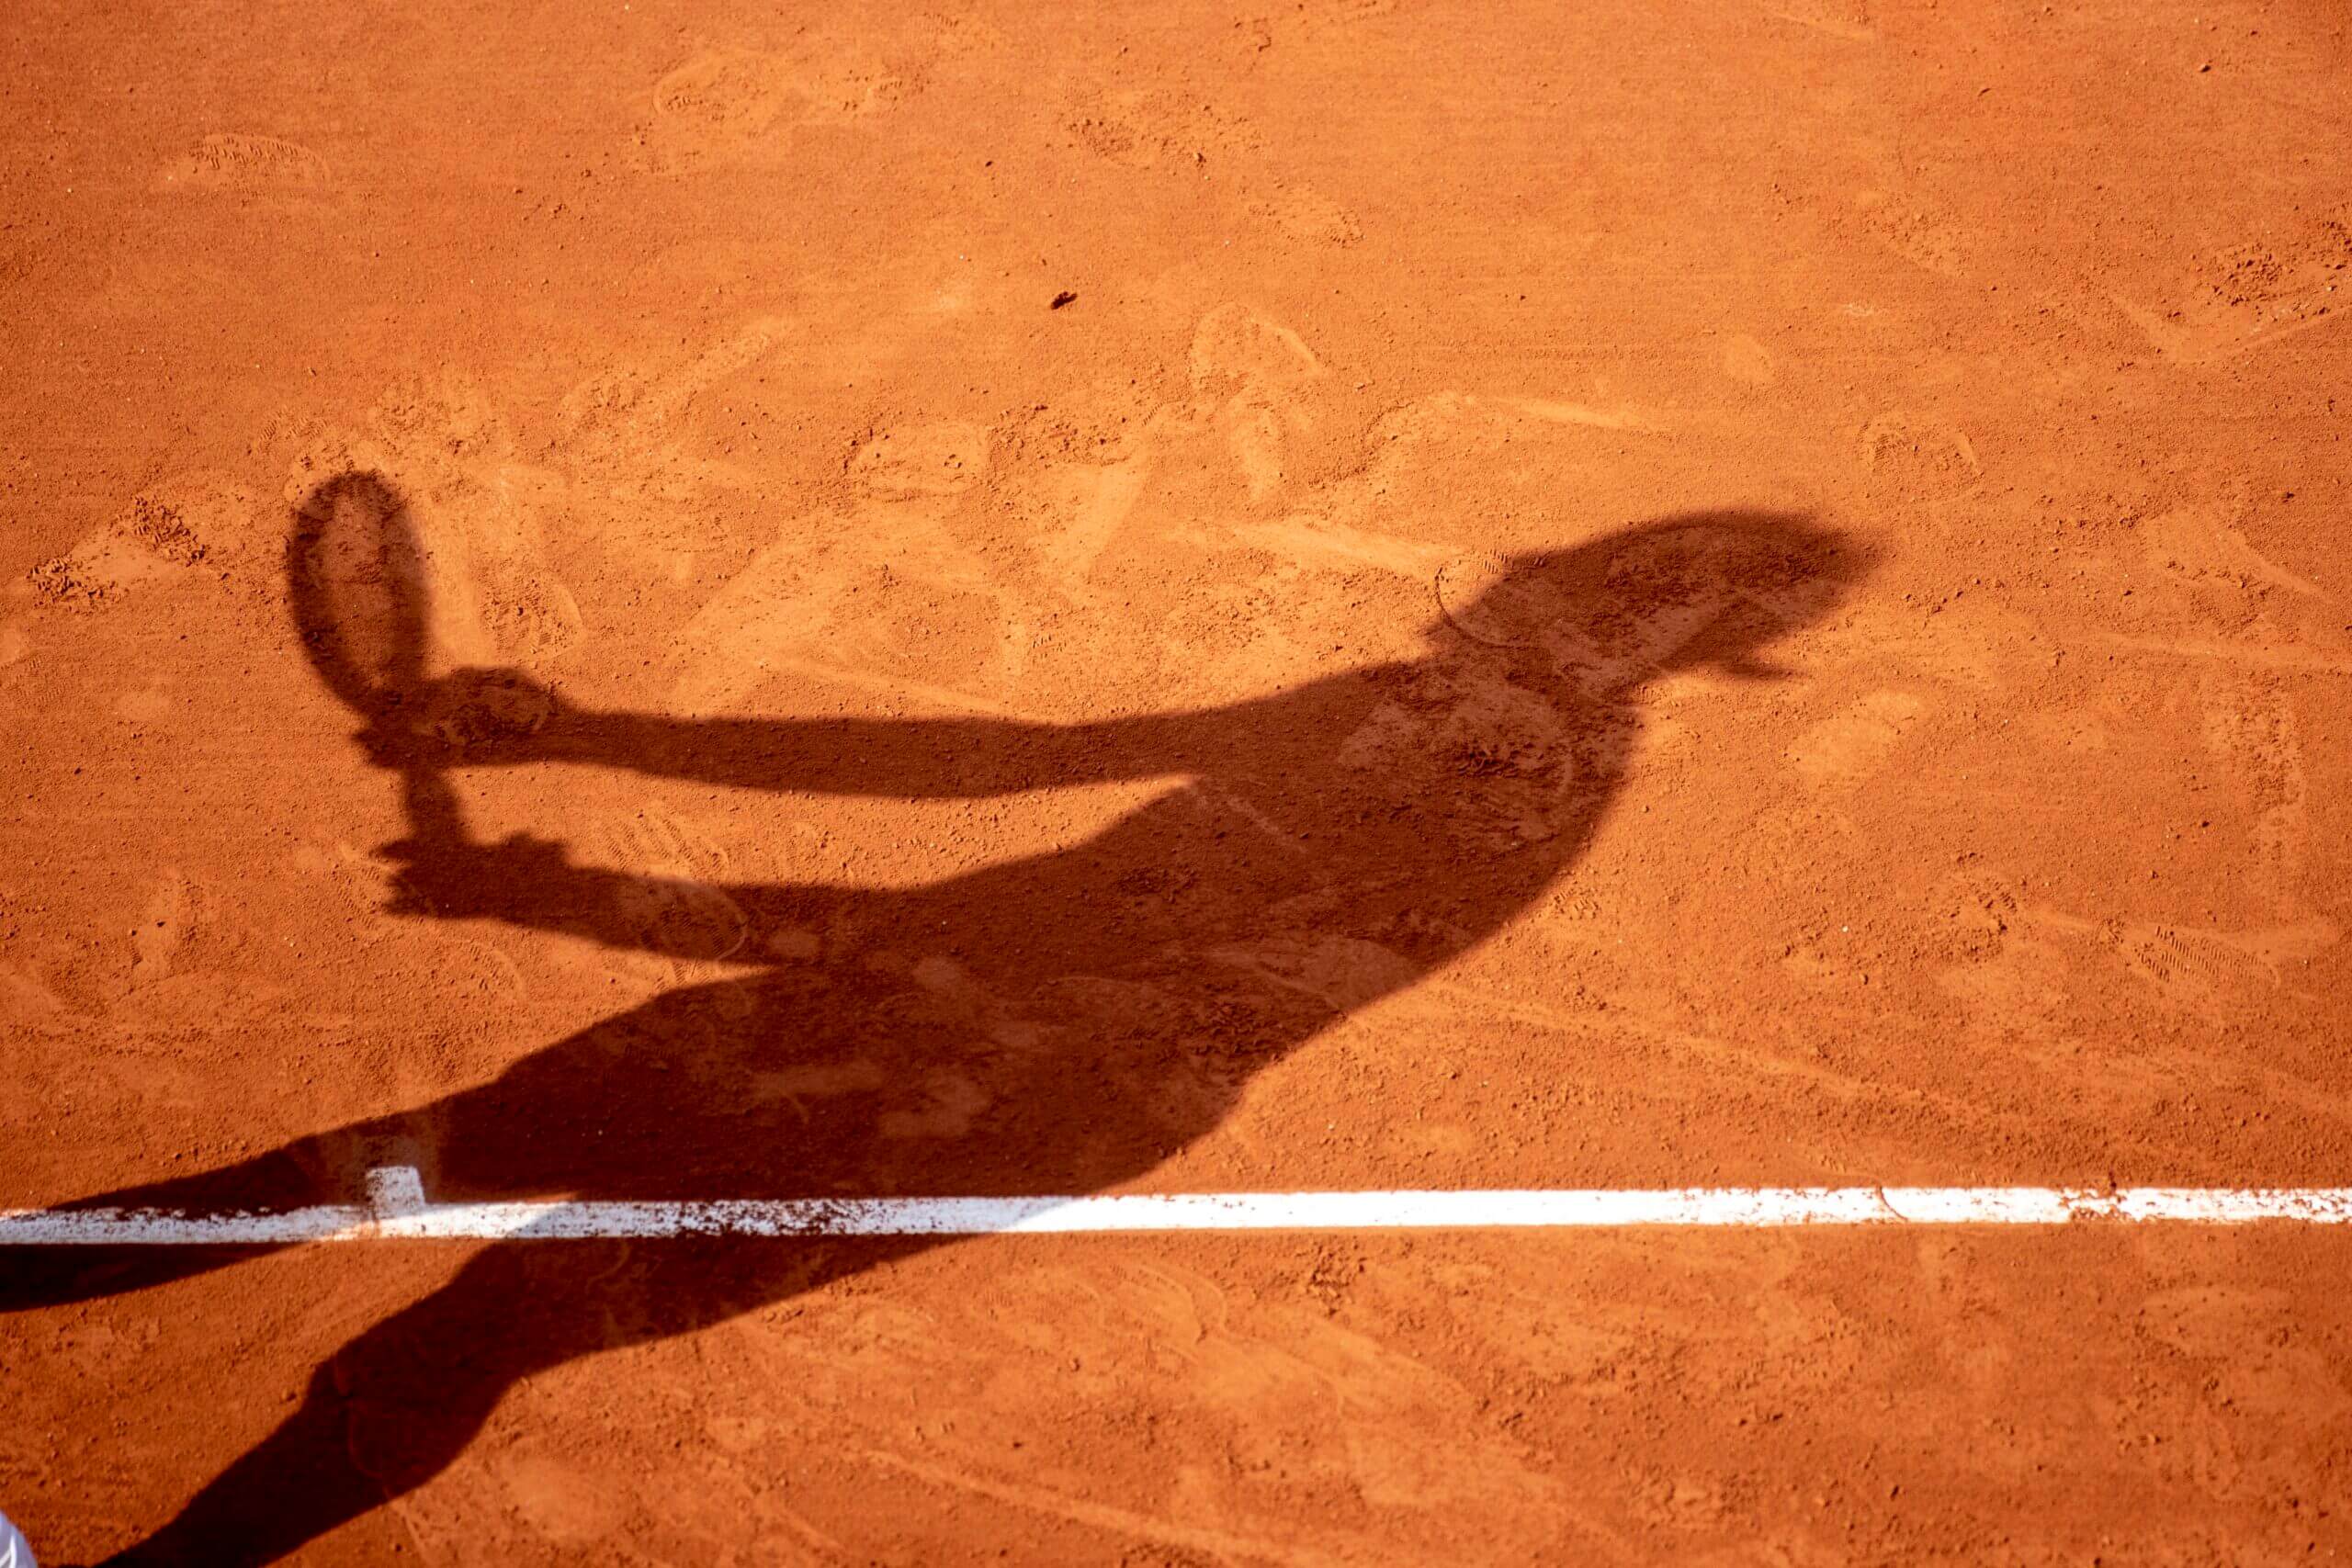 What’s it like to play Rafael Nadal on clay? We asked Djokovic, Ruud and Dimitrov